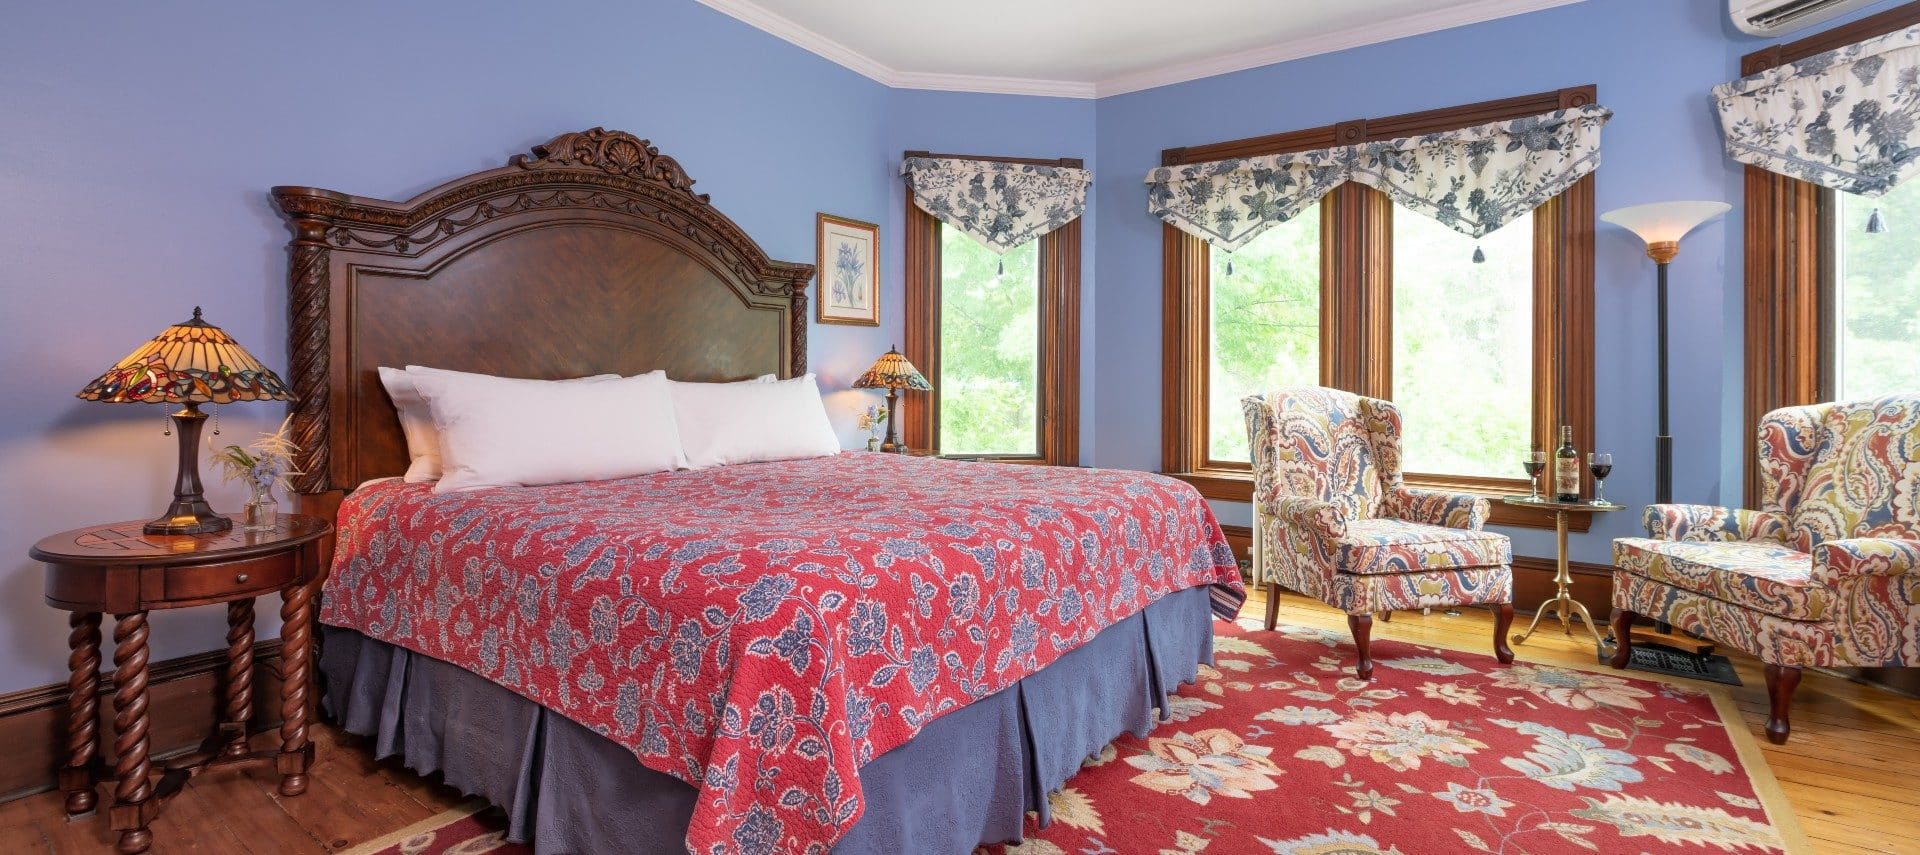 Large bedroom with a king bed in red and blue linens, four large windows with valence curtains and two wingback sitting chairs